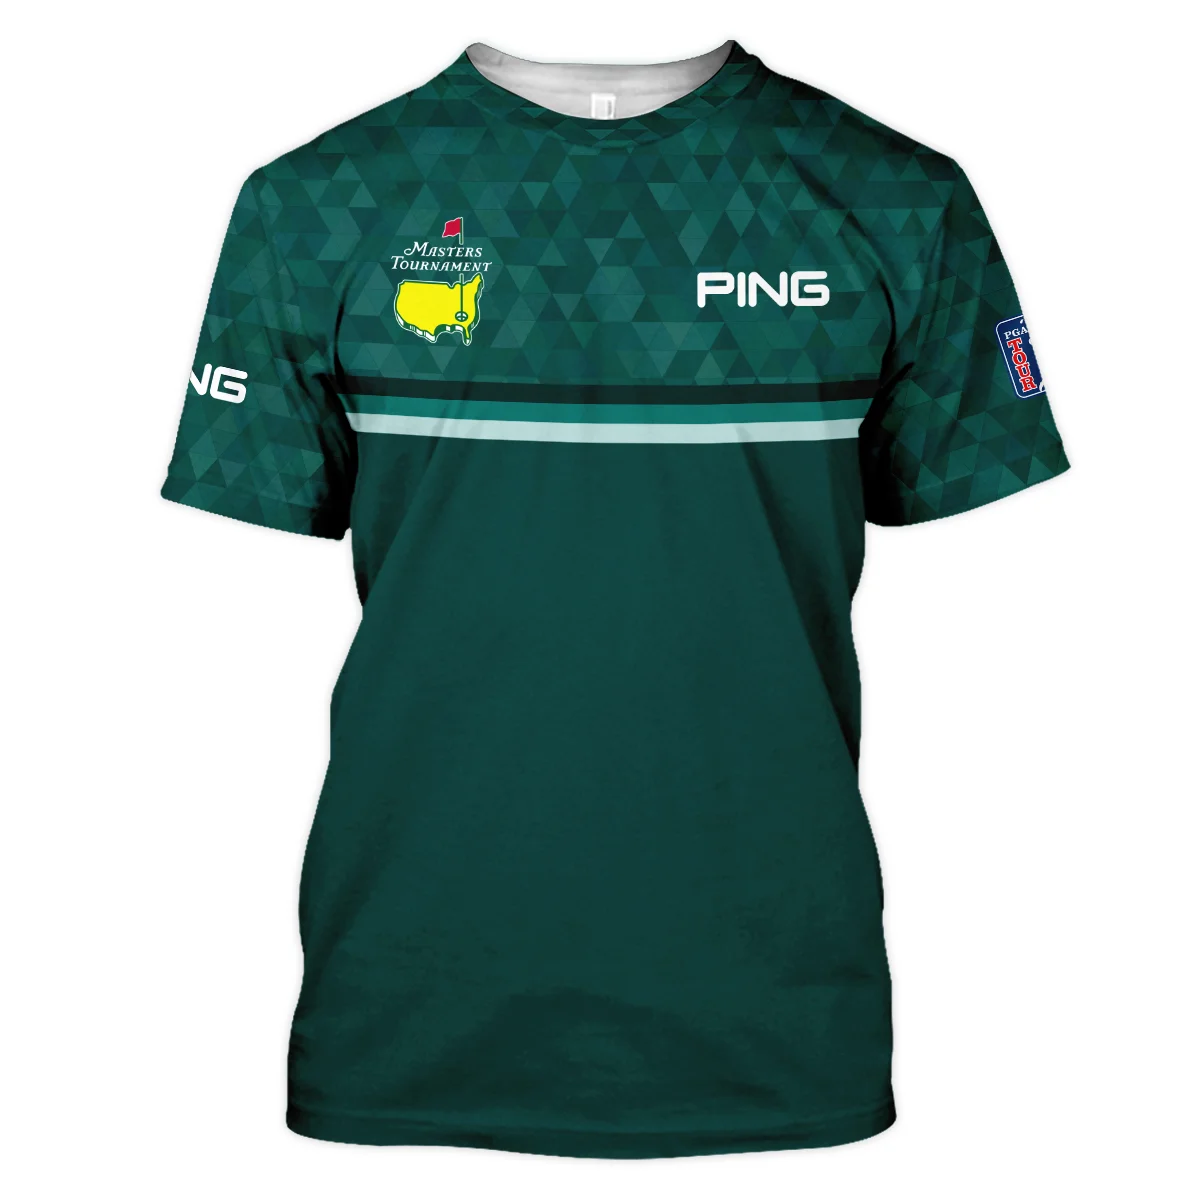 Dark Green Triangle Mosaic Pattern Masters Tournament Ping Vneck Long Polo Shirt Style Classic Long Polo Shirt For Men